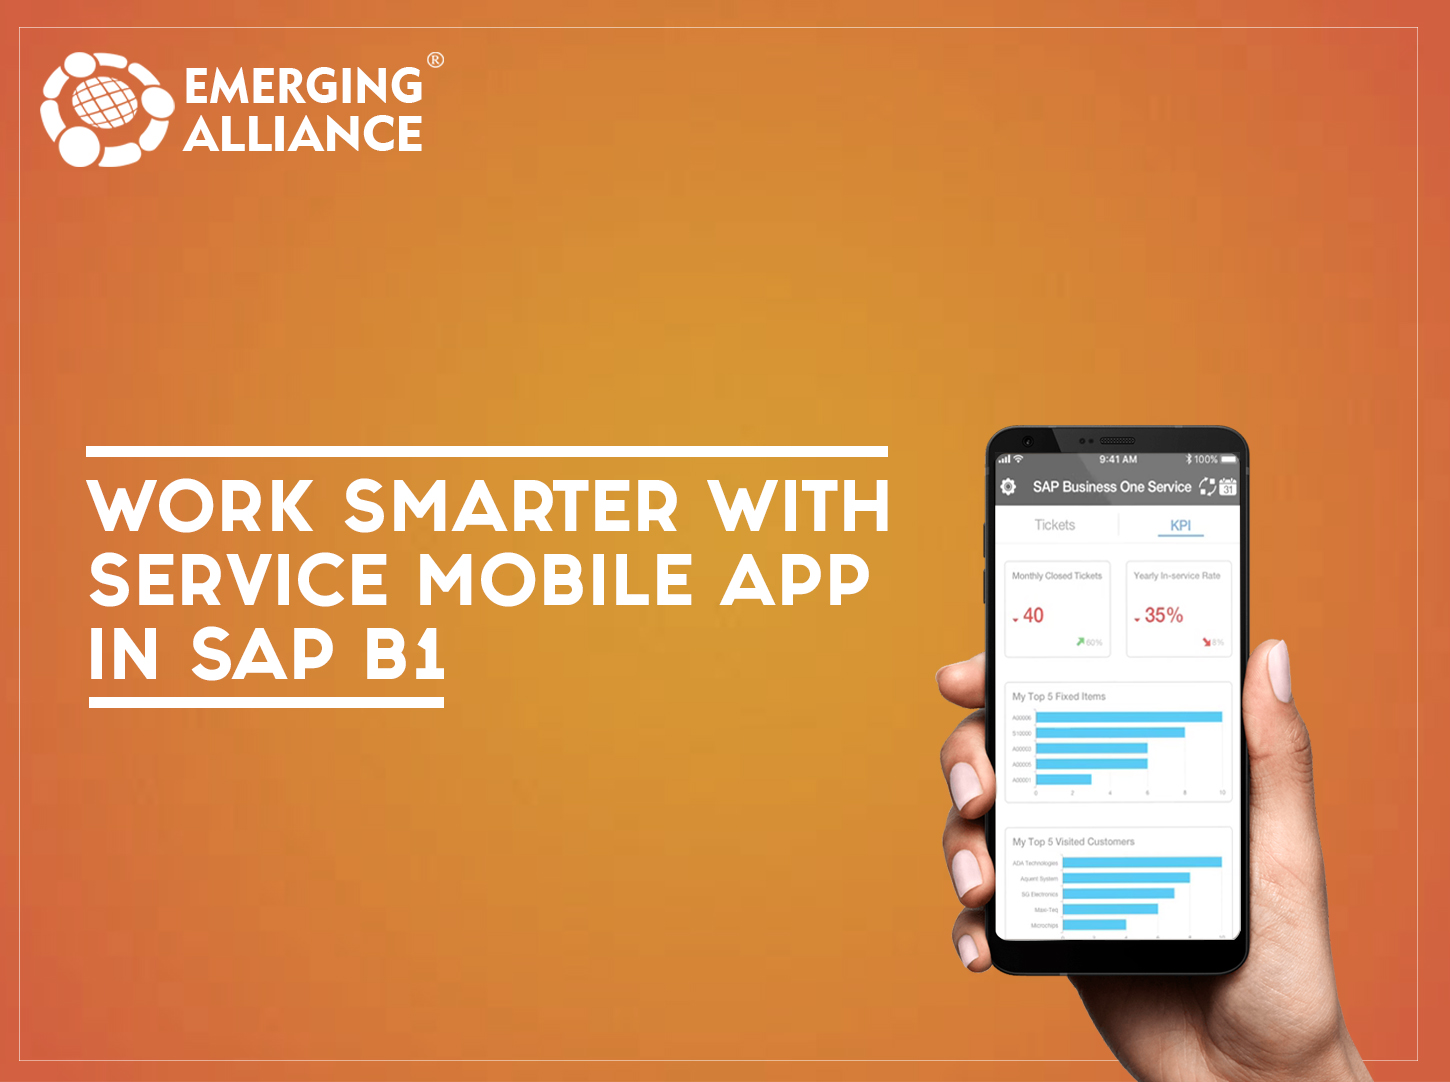 Work smarter with service mobile app in SAP B1